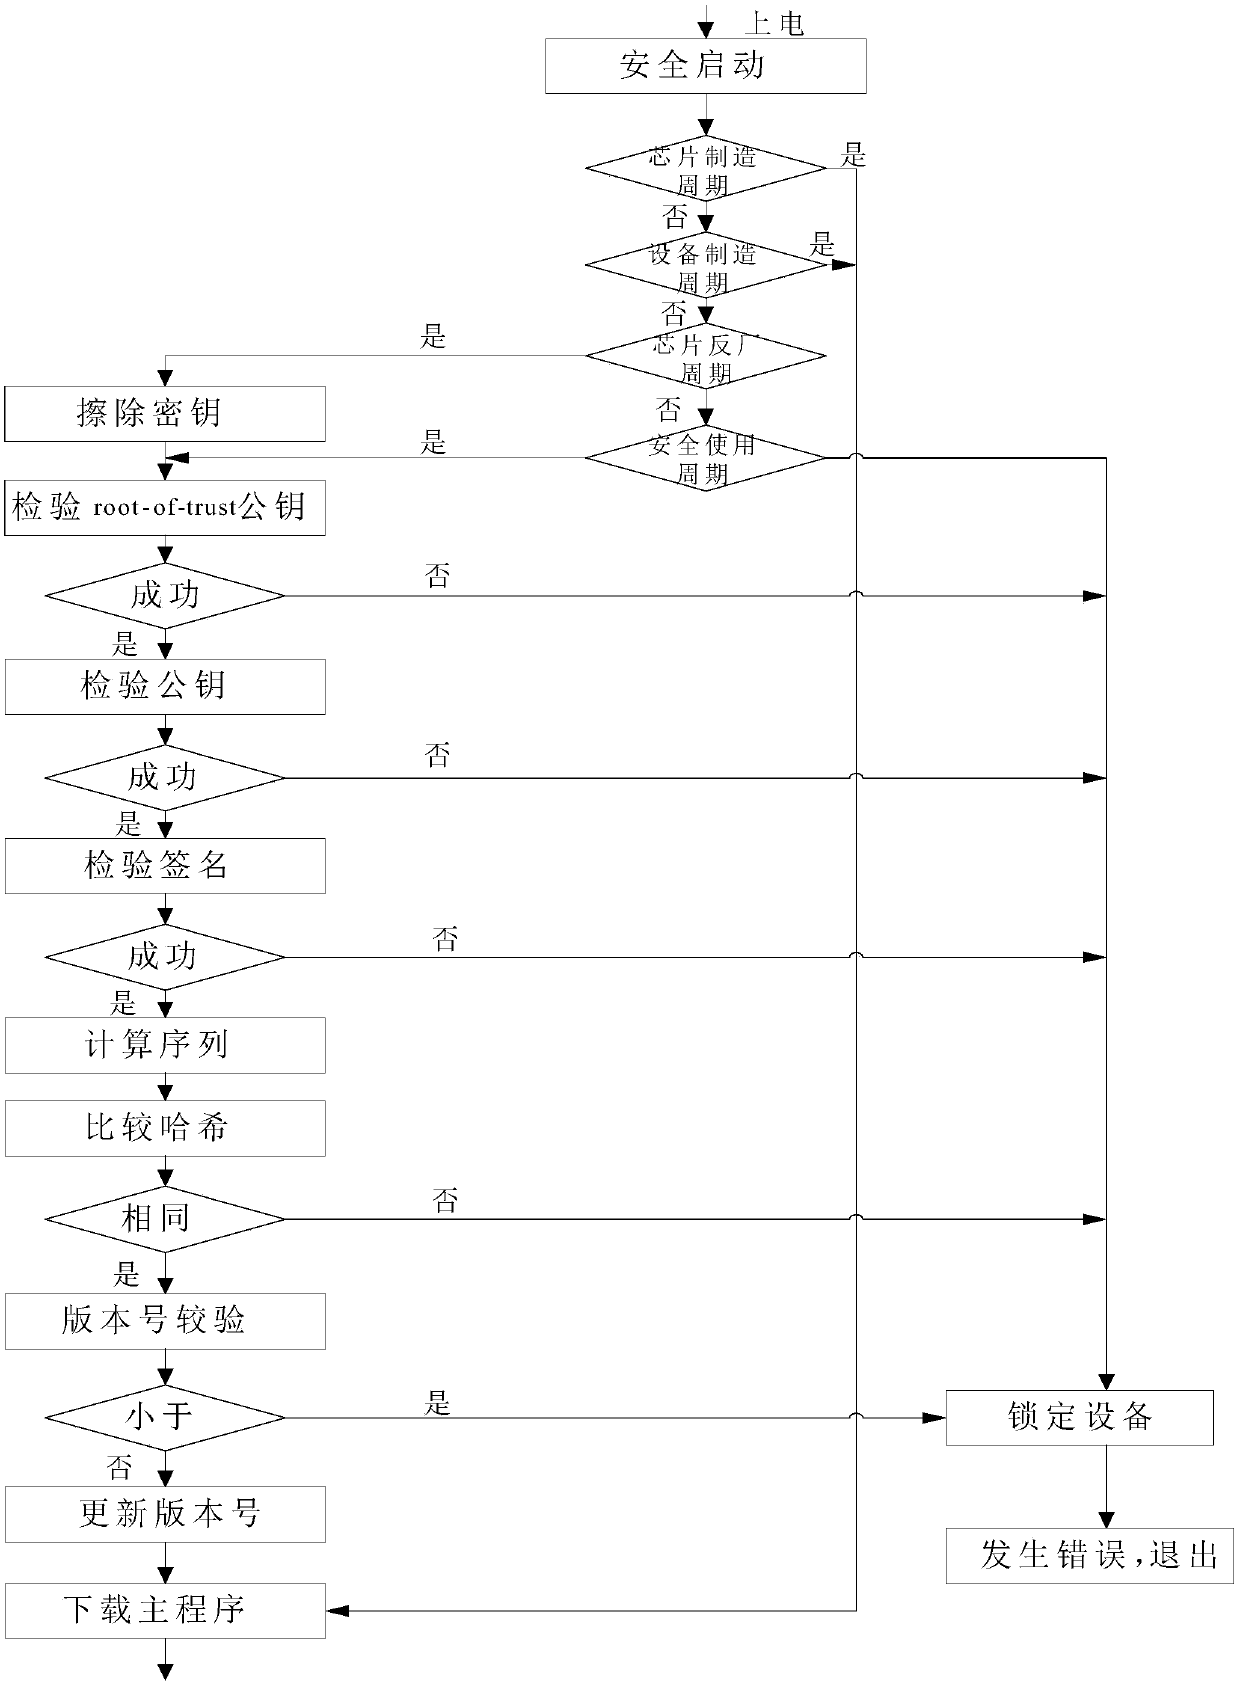 An identity recognition method and system based on a national cryptographic algorithm